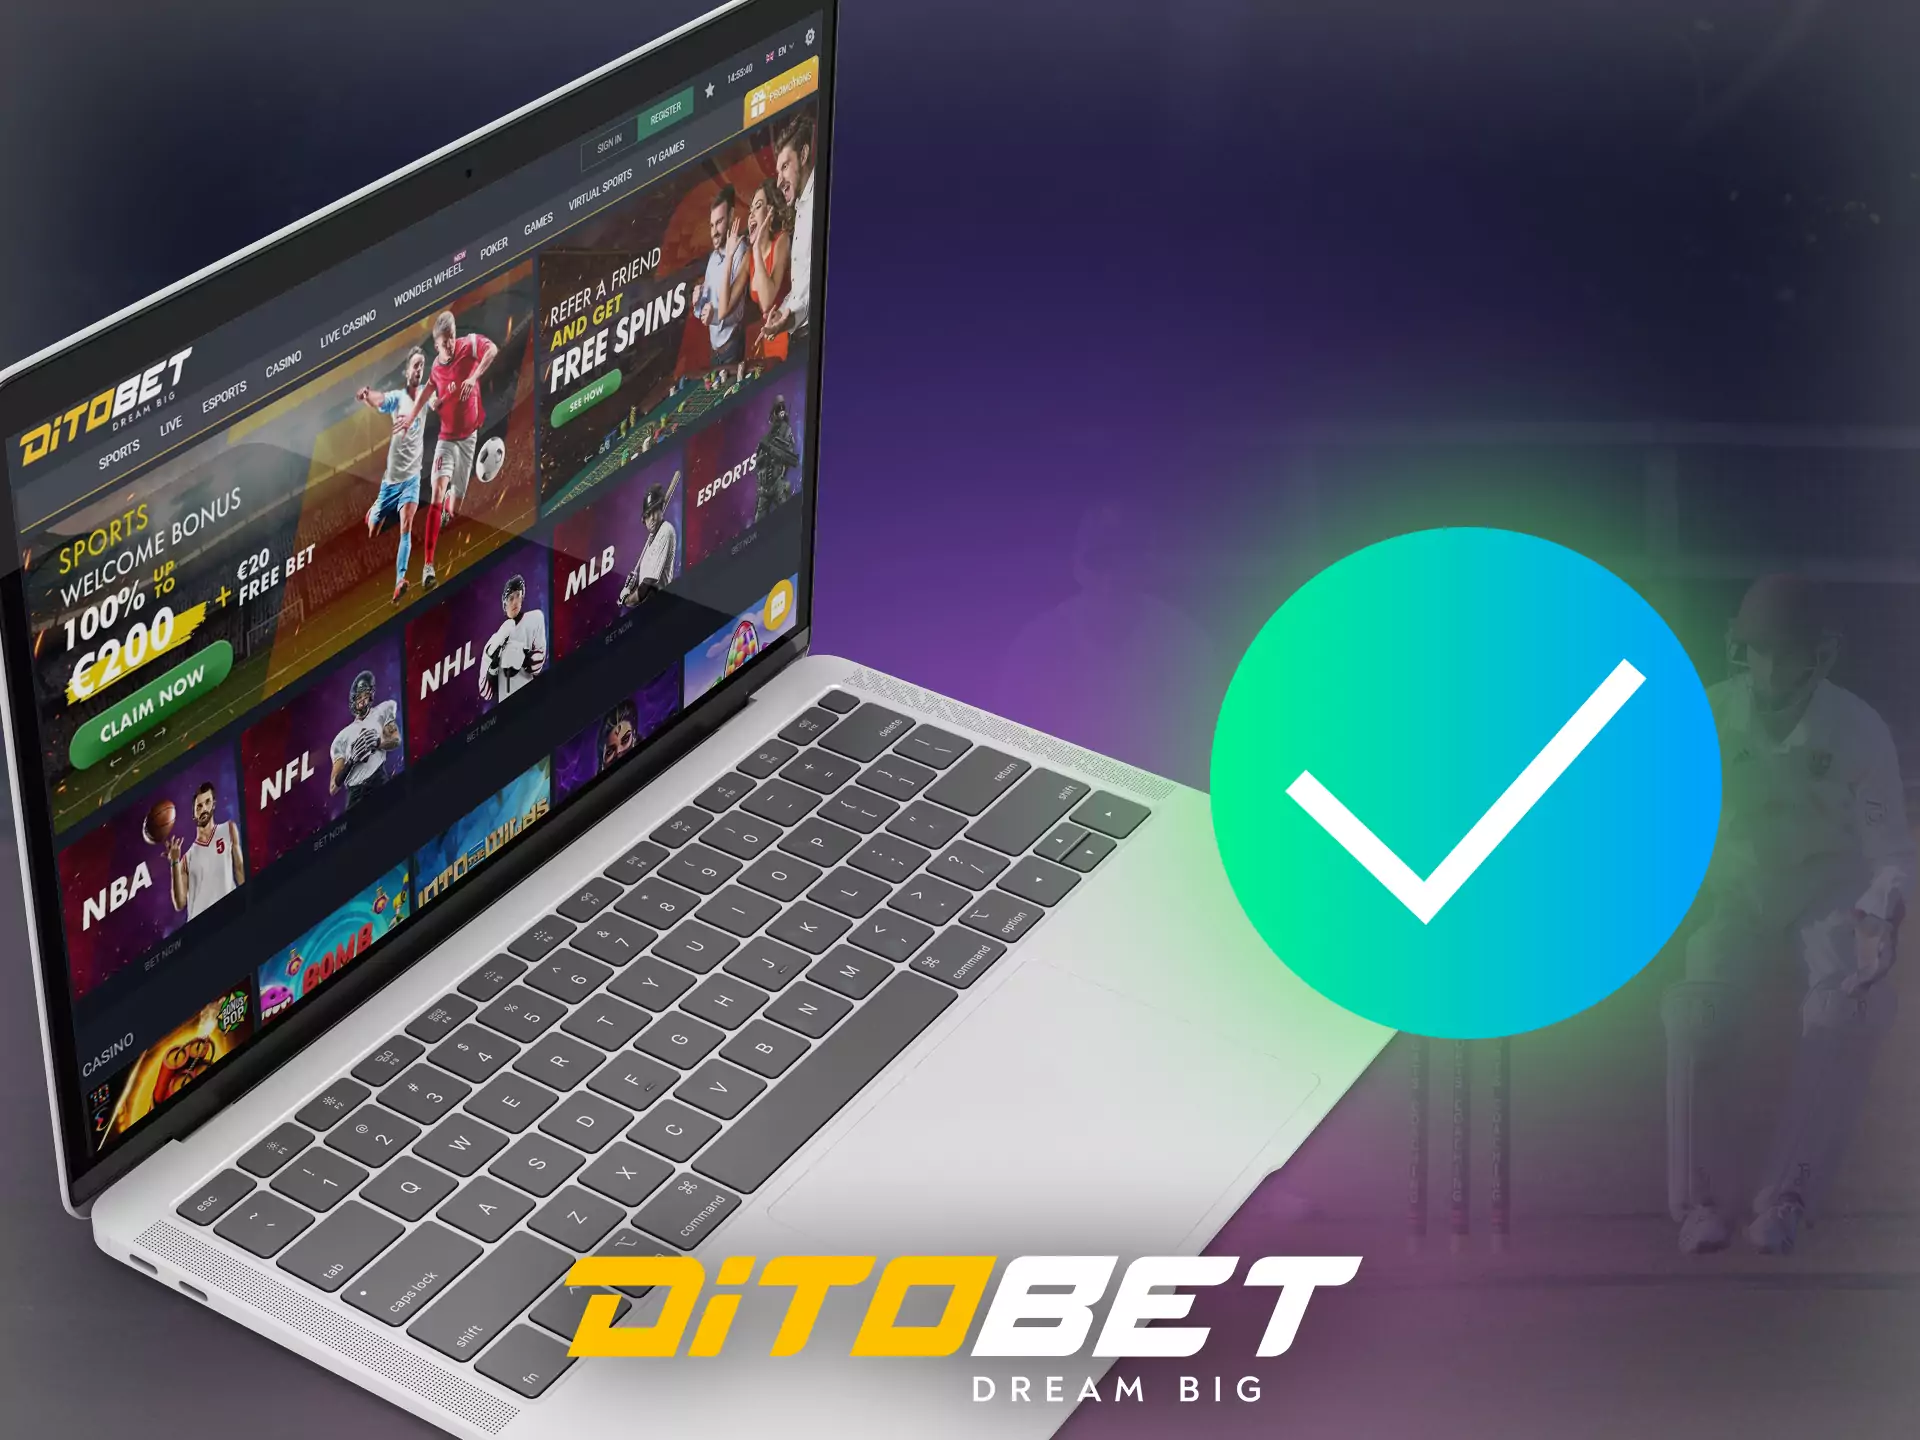 Verify your identity with documents and play with Ditobet.